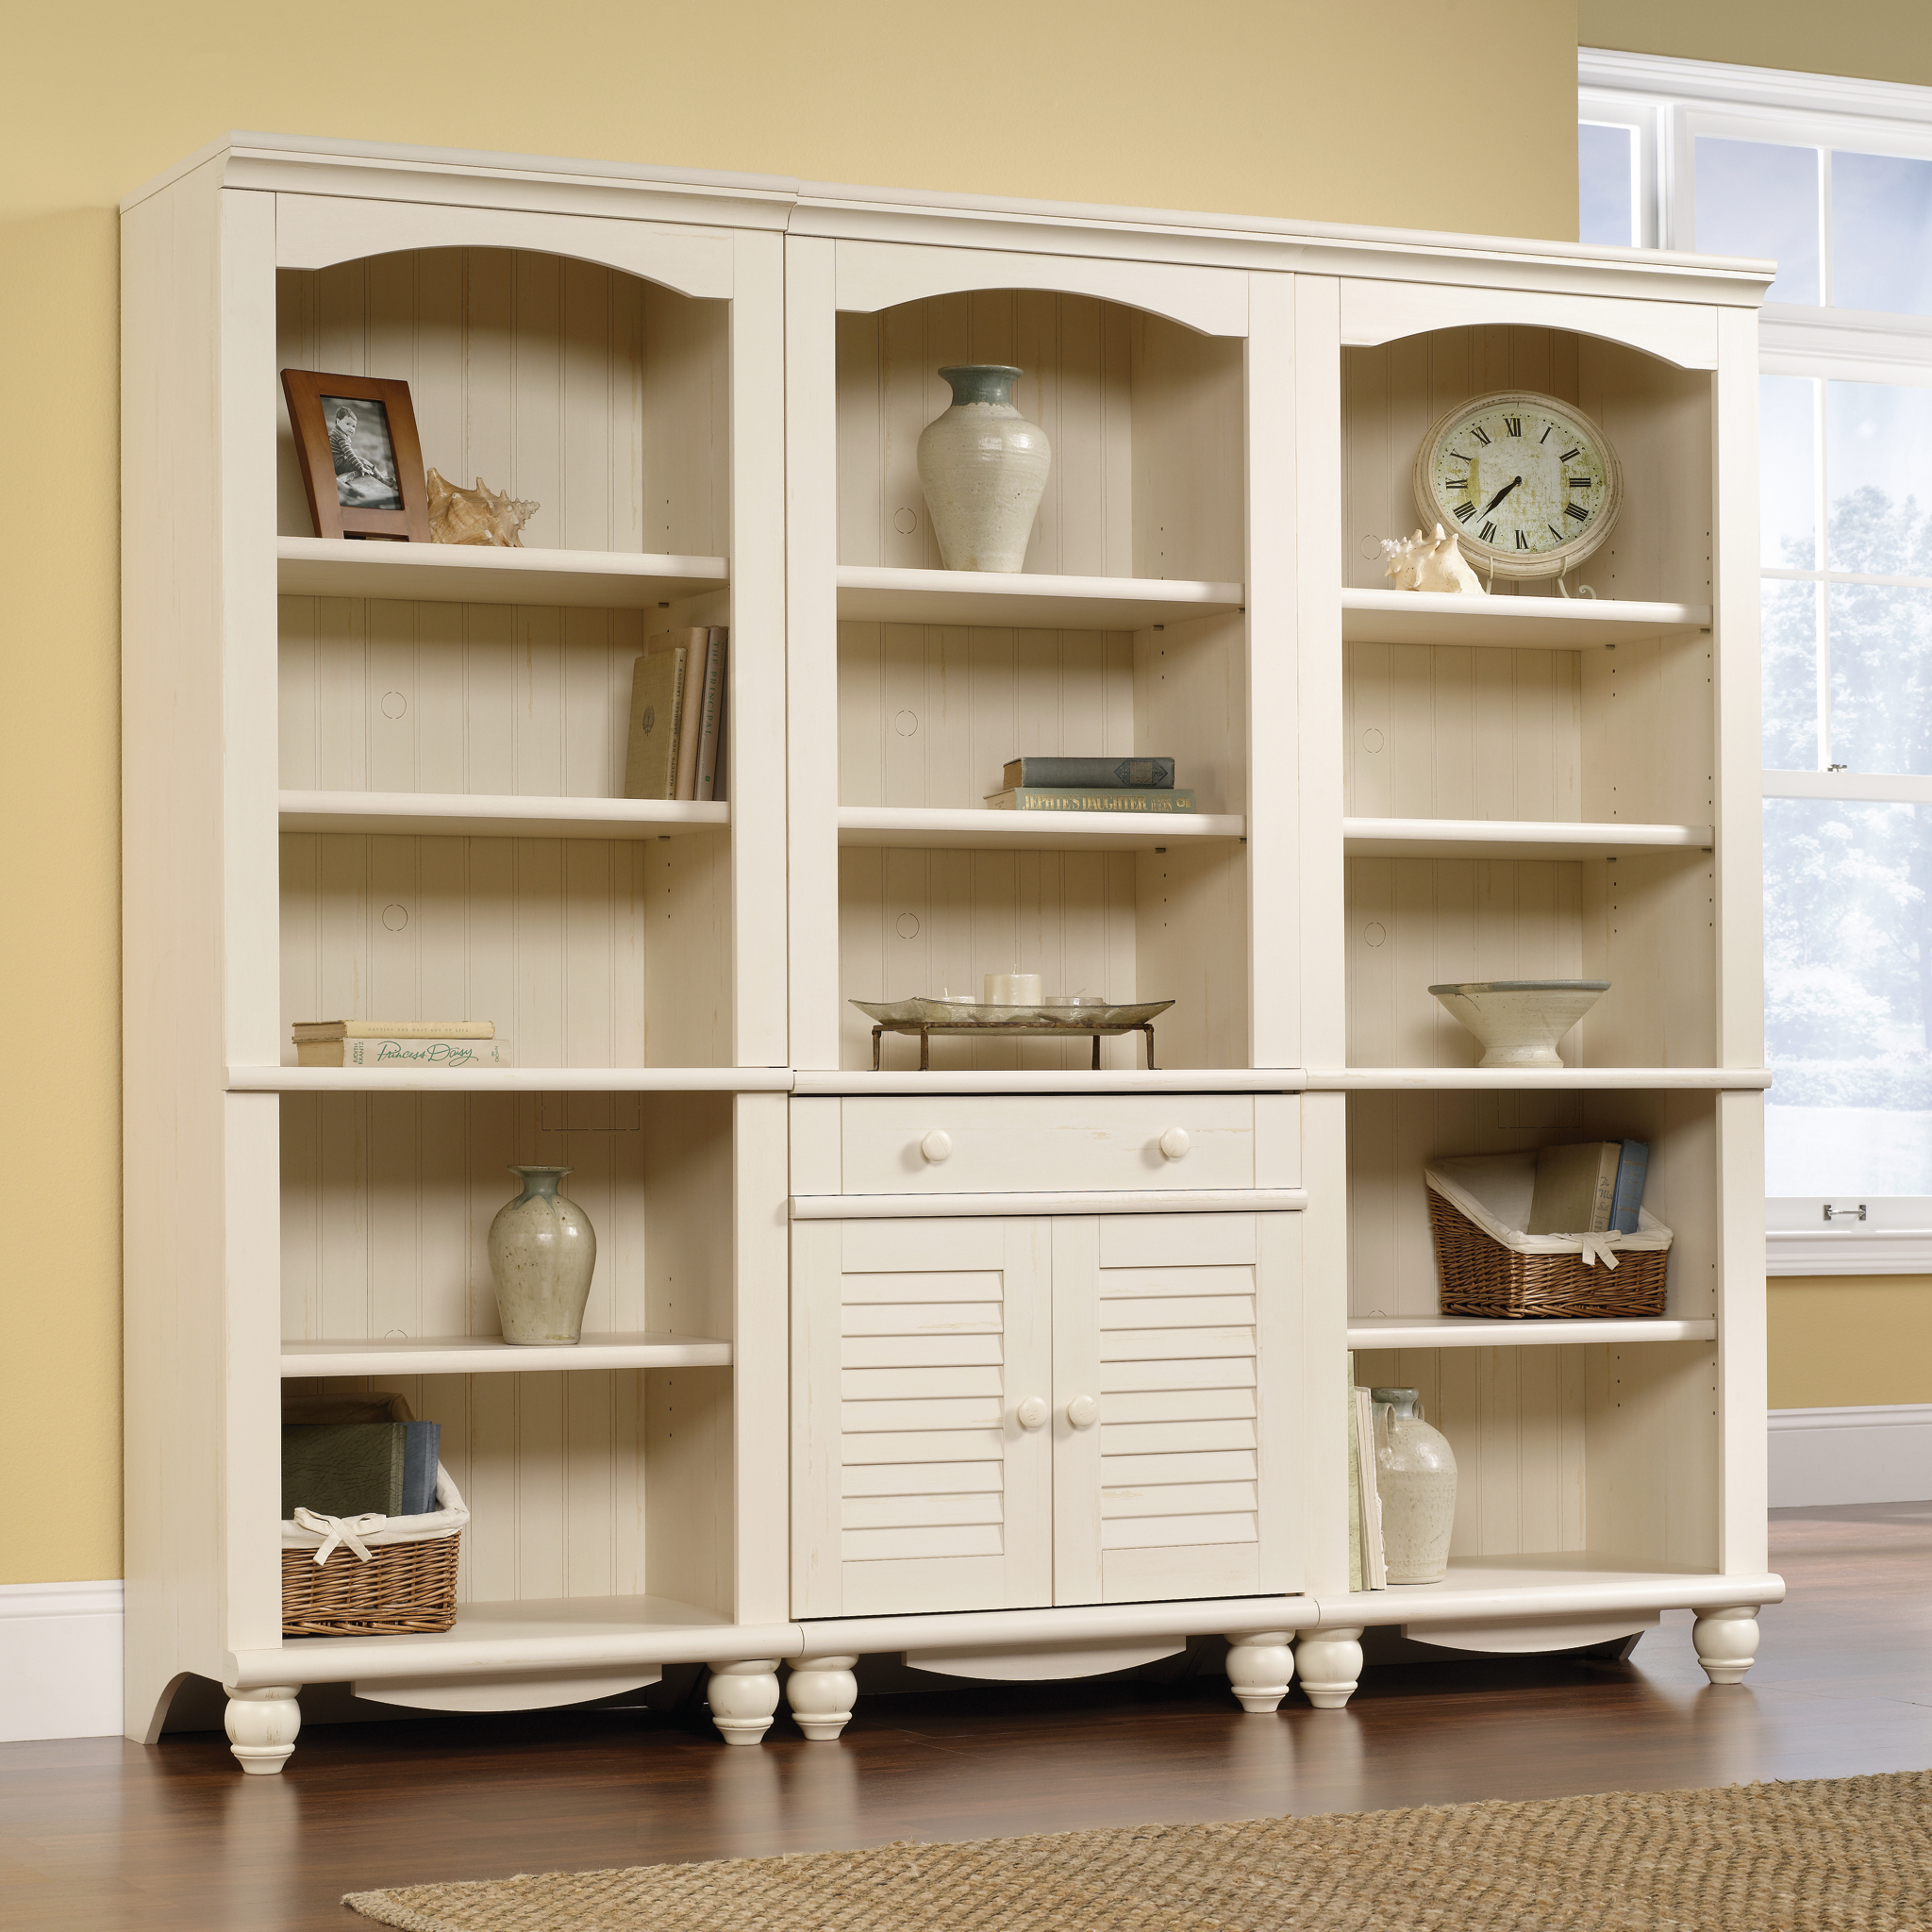 Sauder Harbor View 72" Library Bookcase, Antiqued White Finish - image 3 of 6